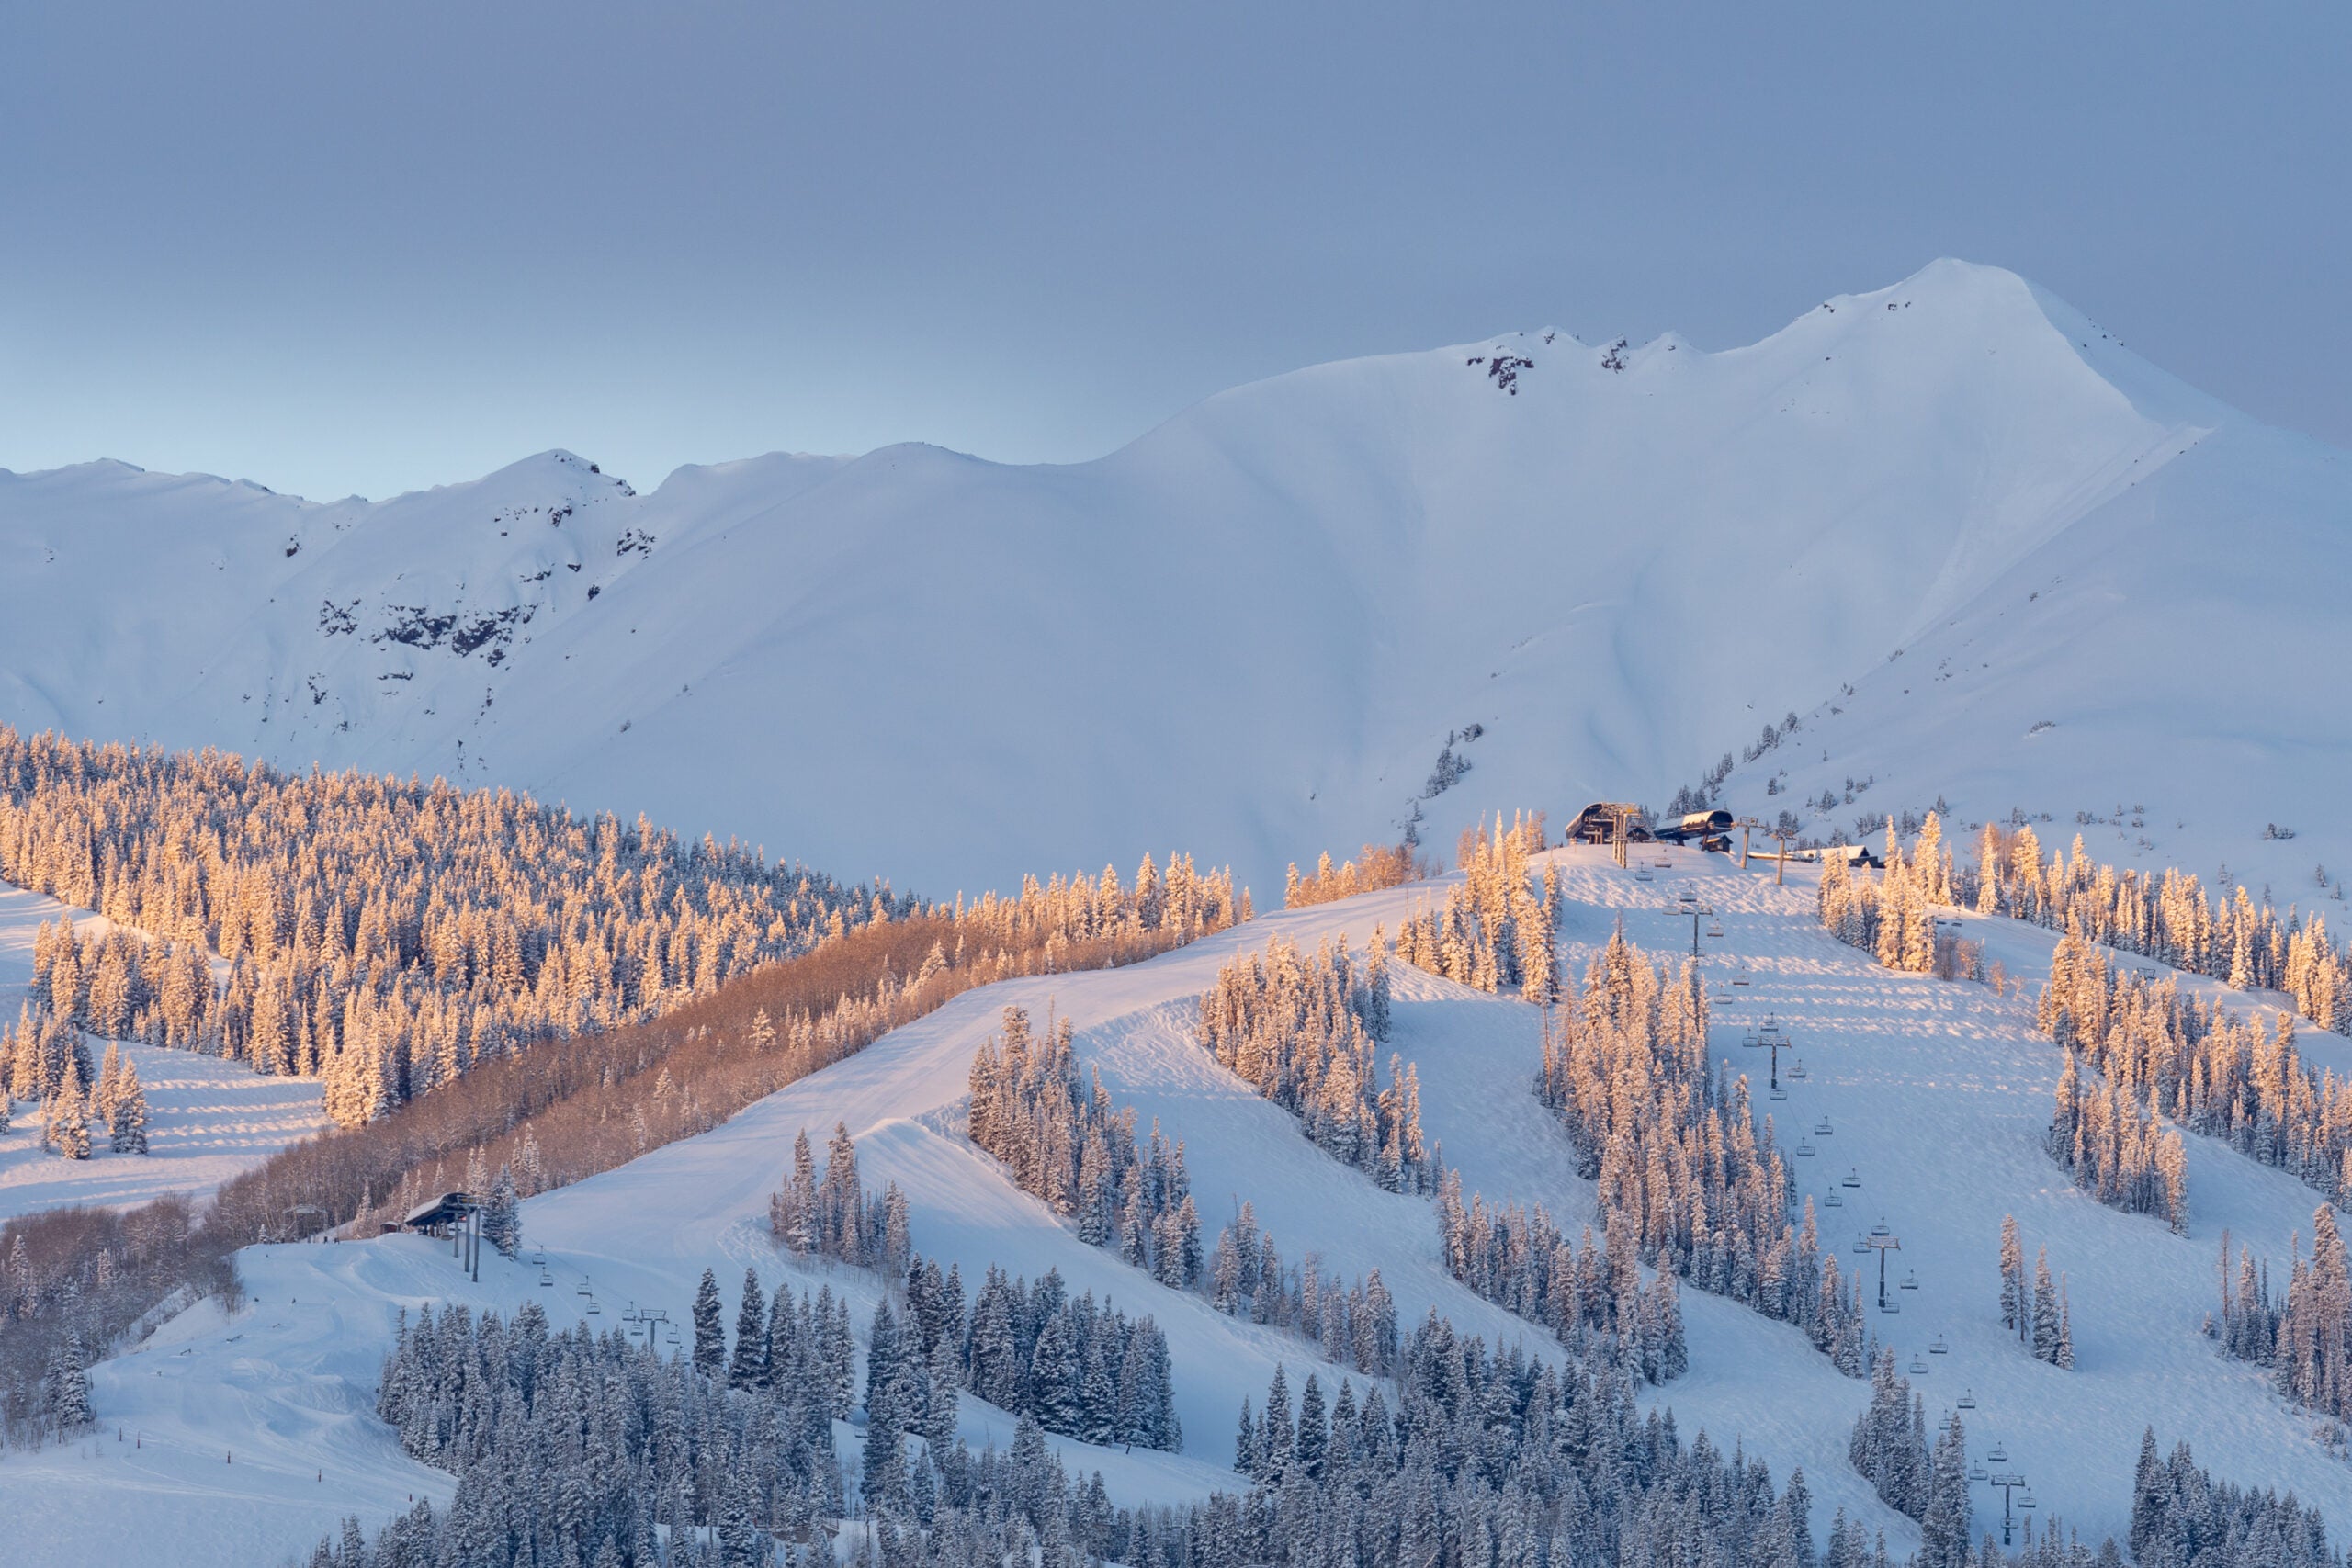 How to choose the best ski mountain for you